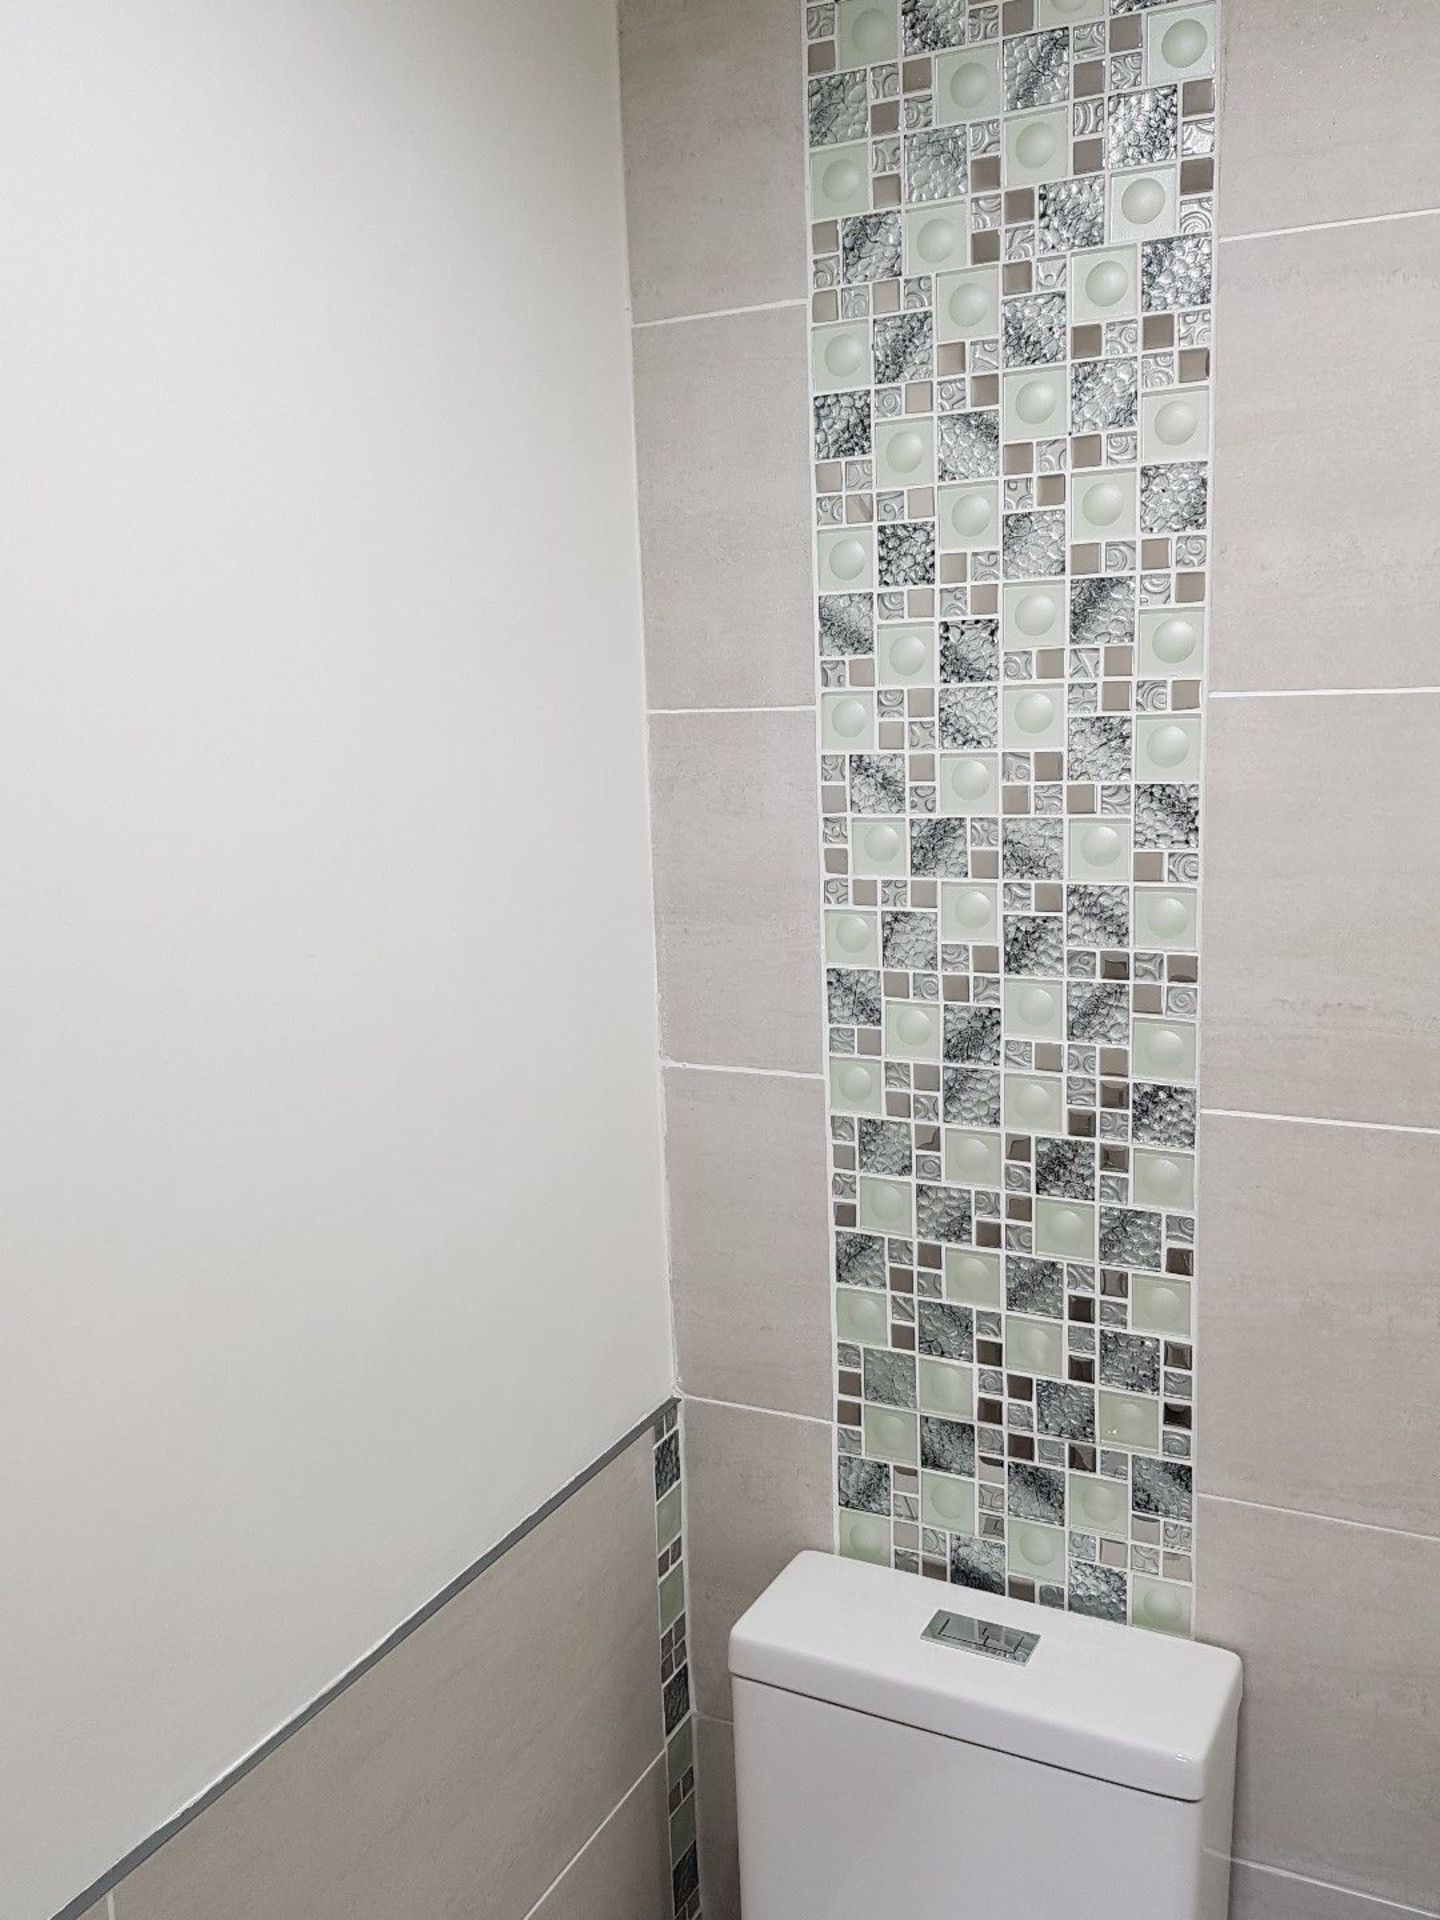 5 Square Metres - High Quality Glass/Stainless Steel Mosaic Tiles - Image 2 of 6